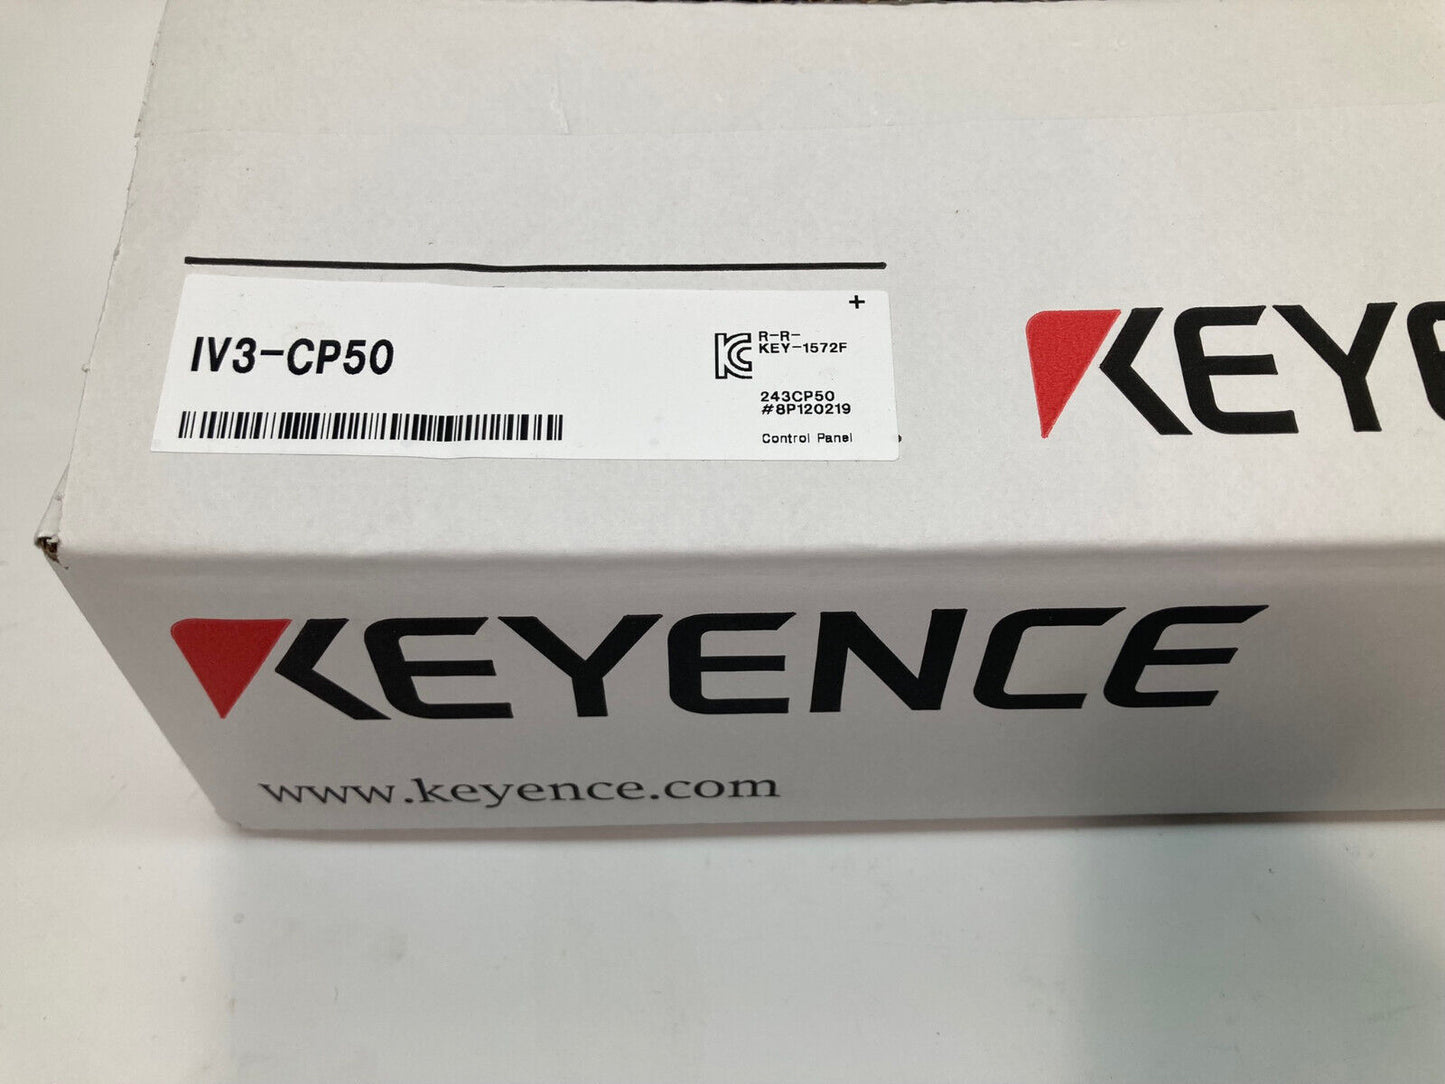 New KEYENCE IV3-CP50 Control Panel, Overnight available